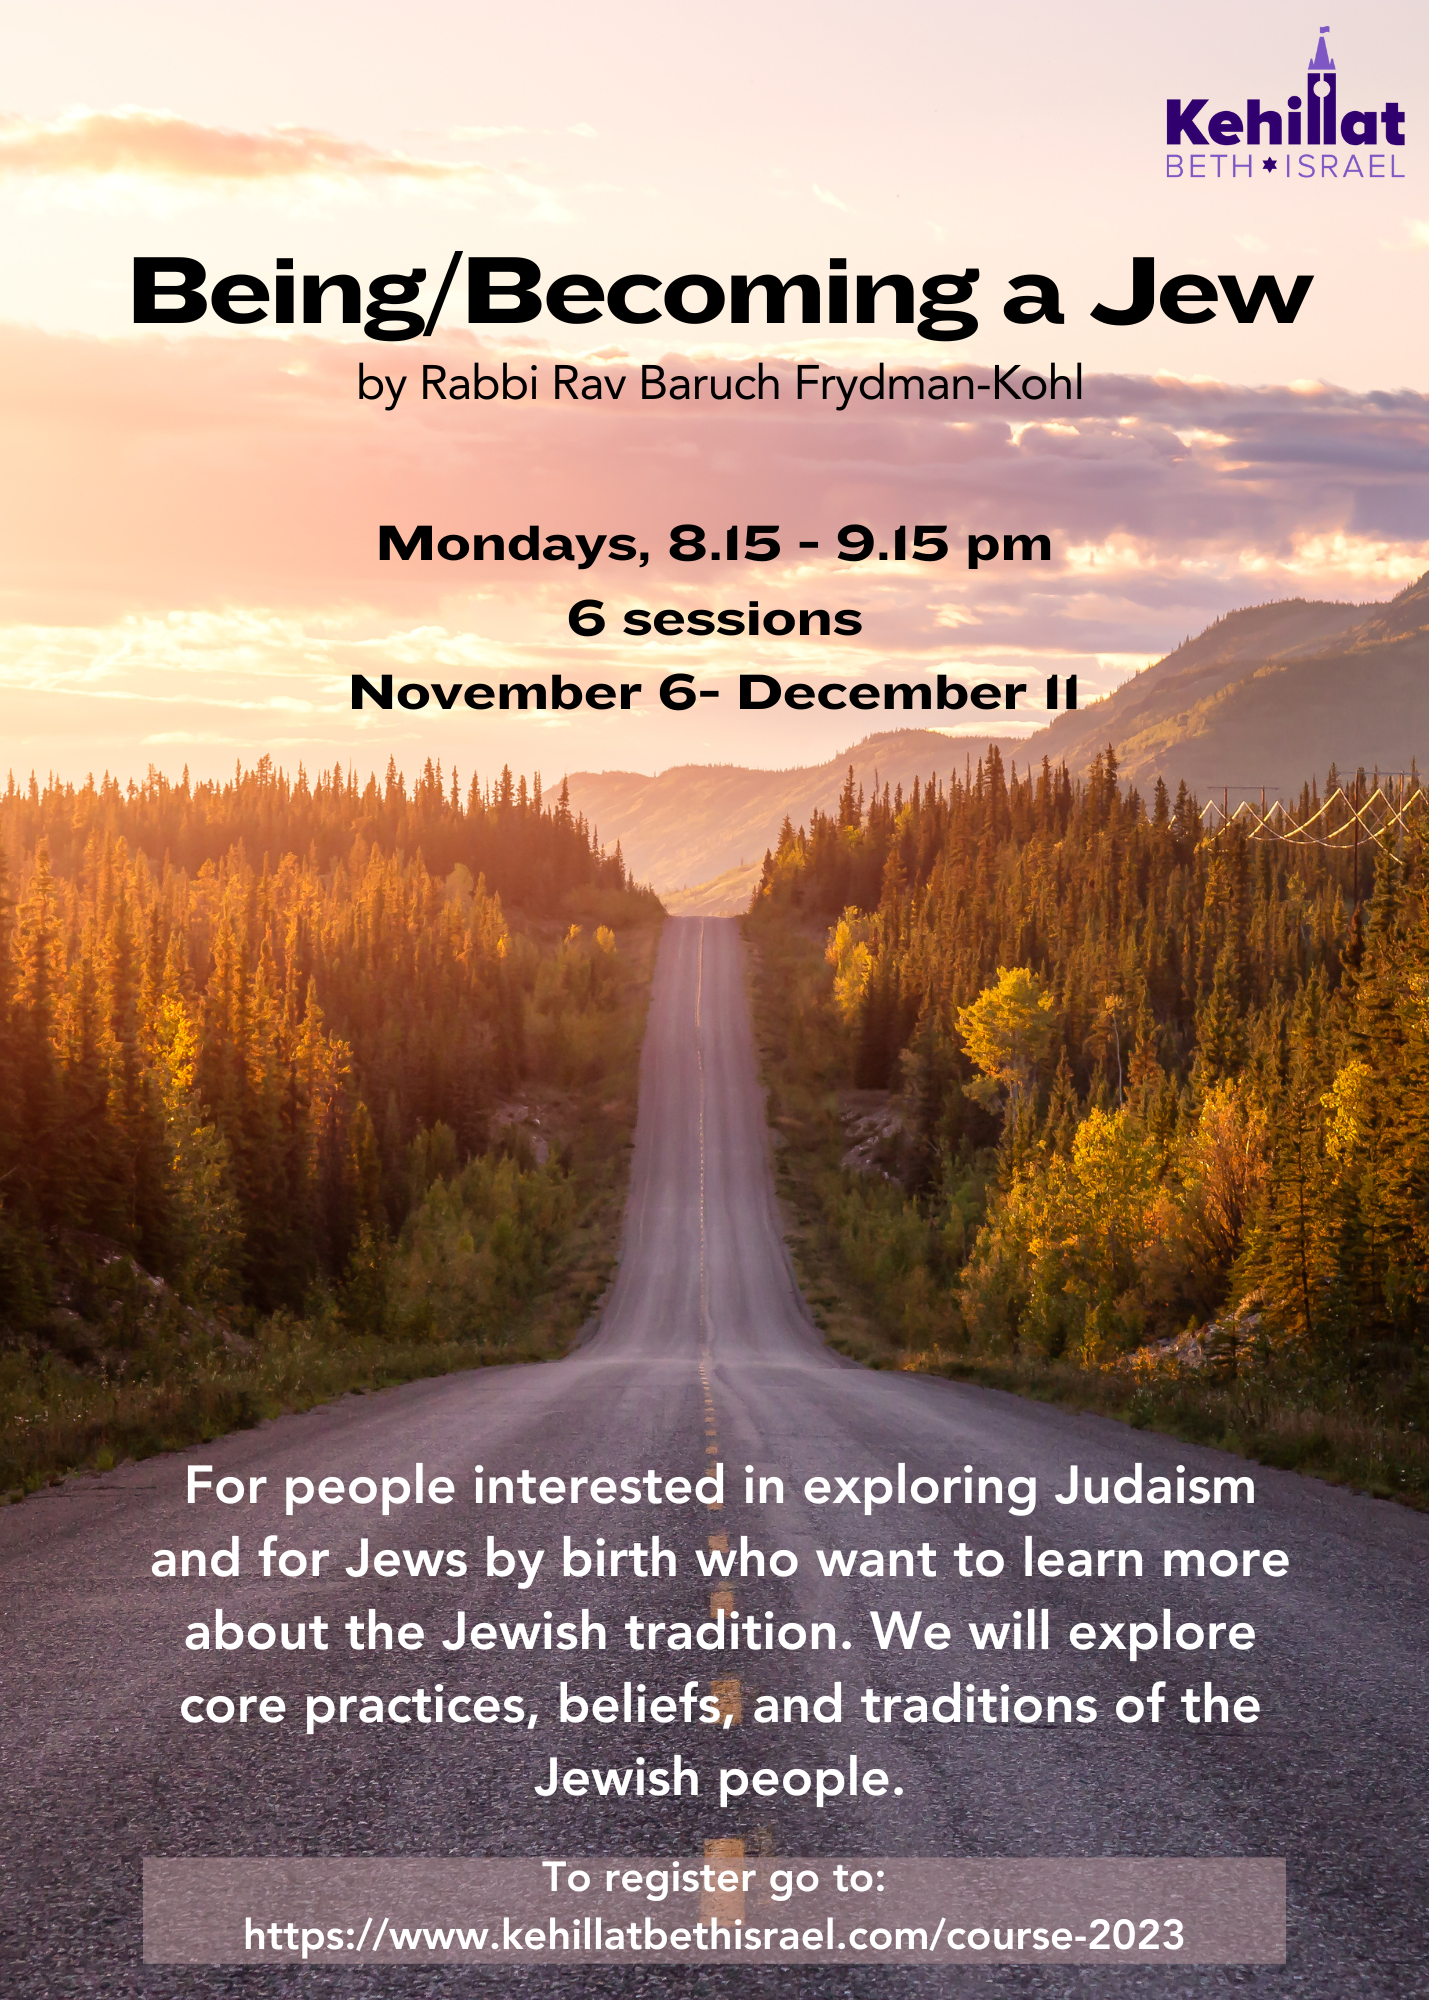 Being/Becoming a Jew